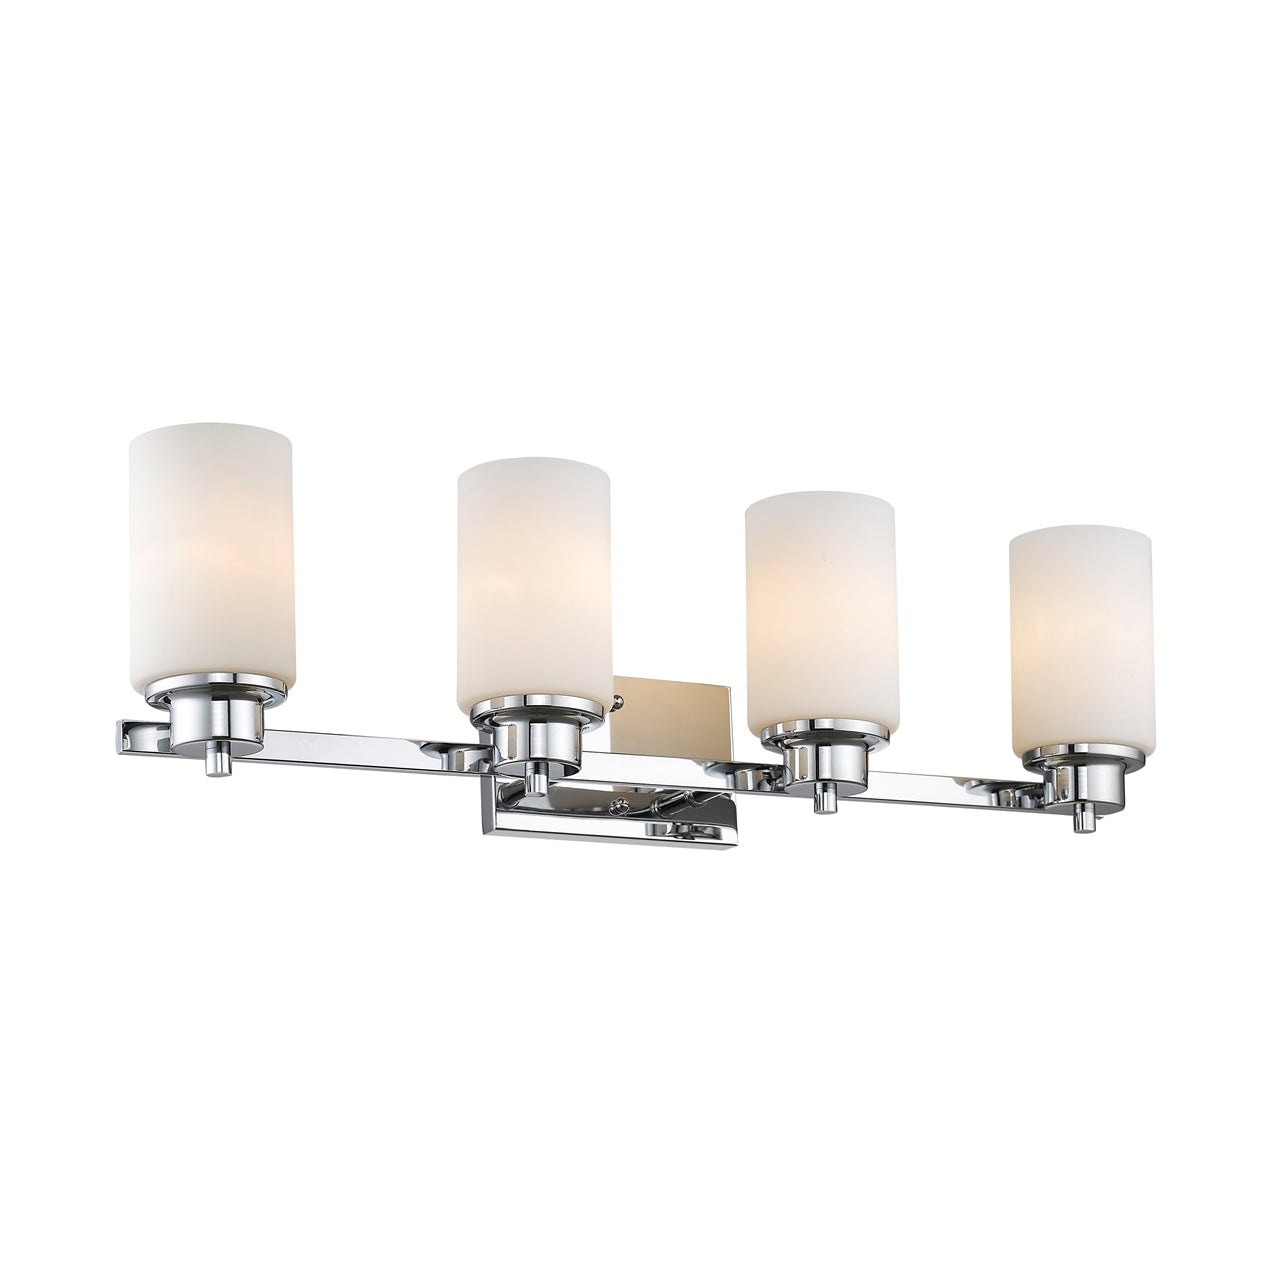 SCARLETT Contemporary 4 Light Chrome Finish Bath Vanity Light Etched White Glass 29" Wide